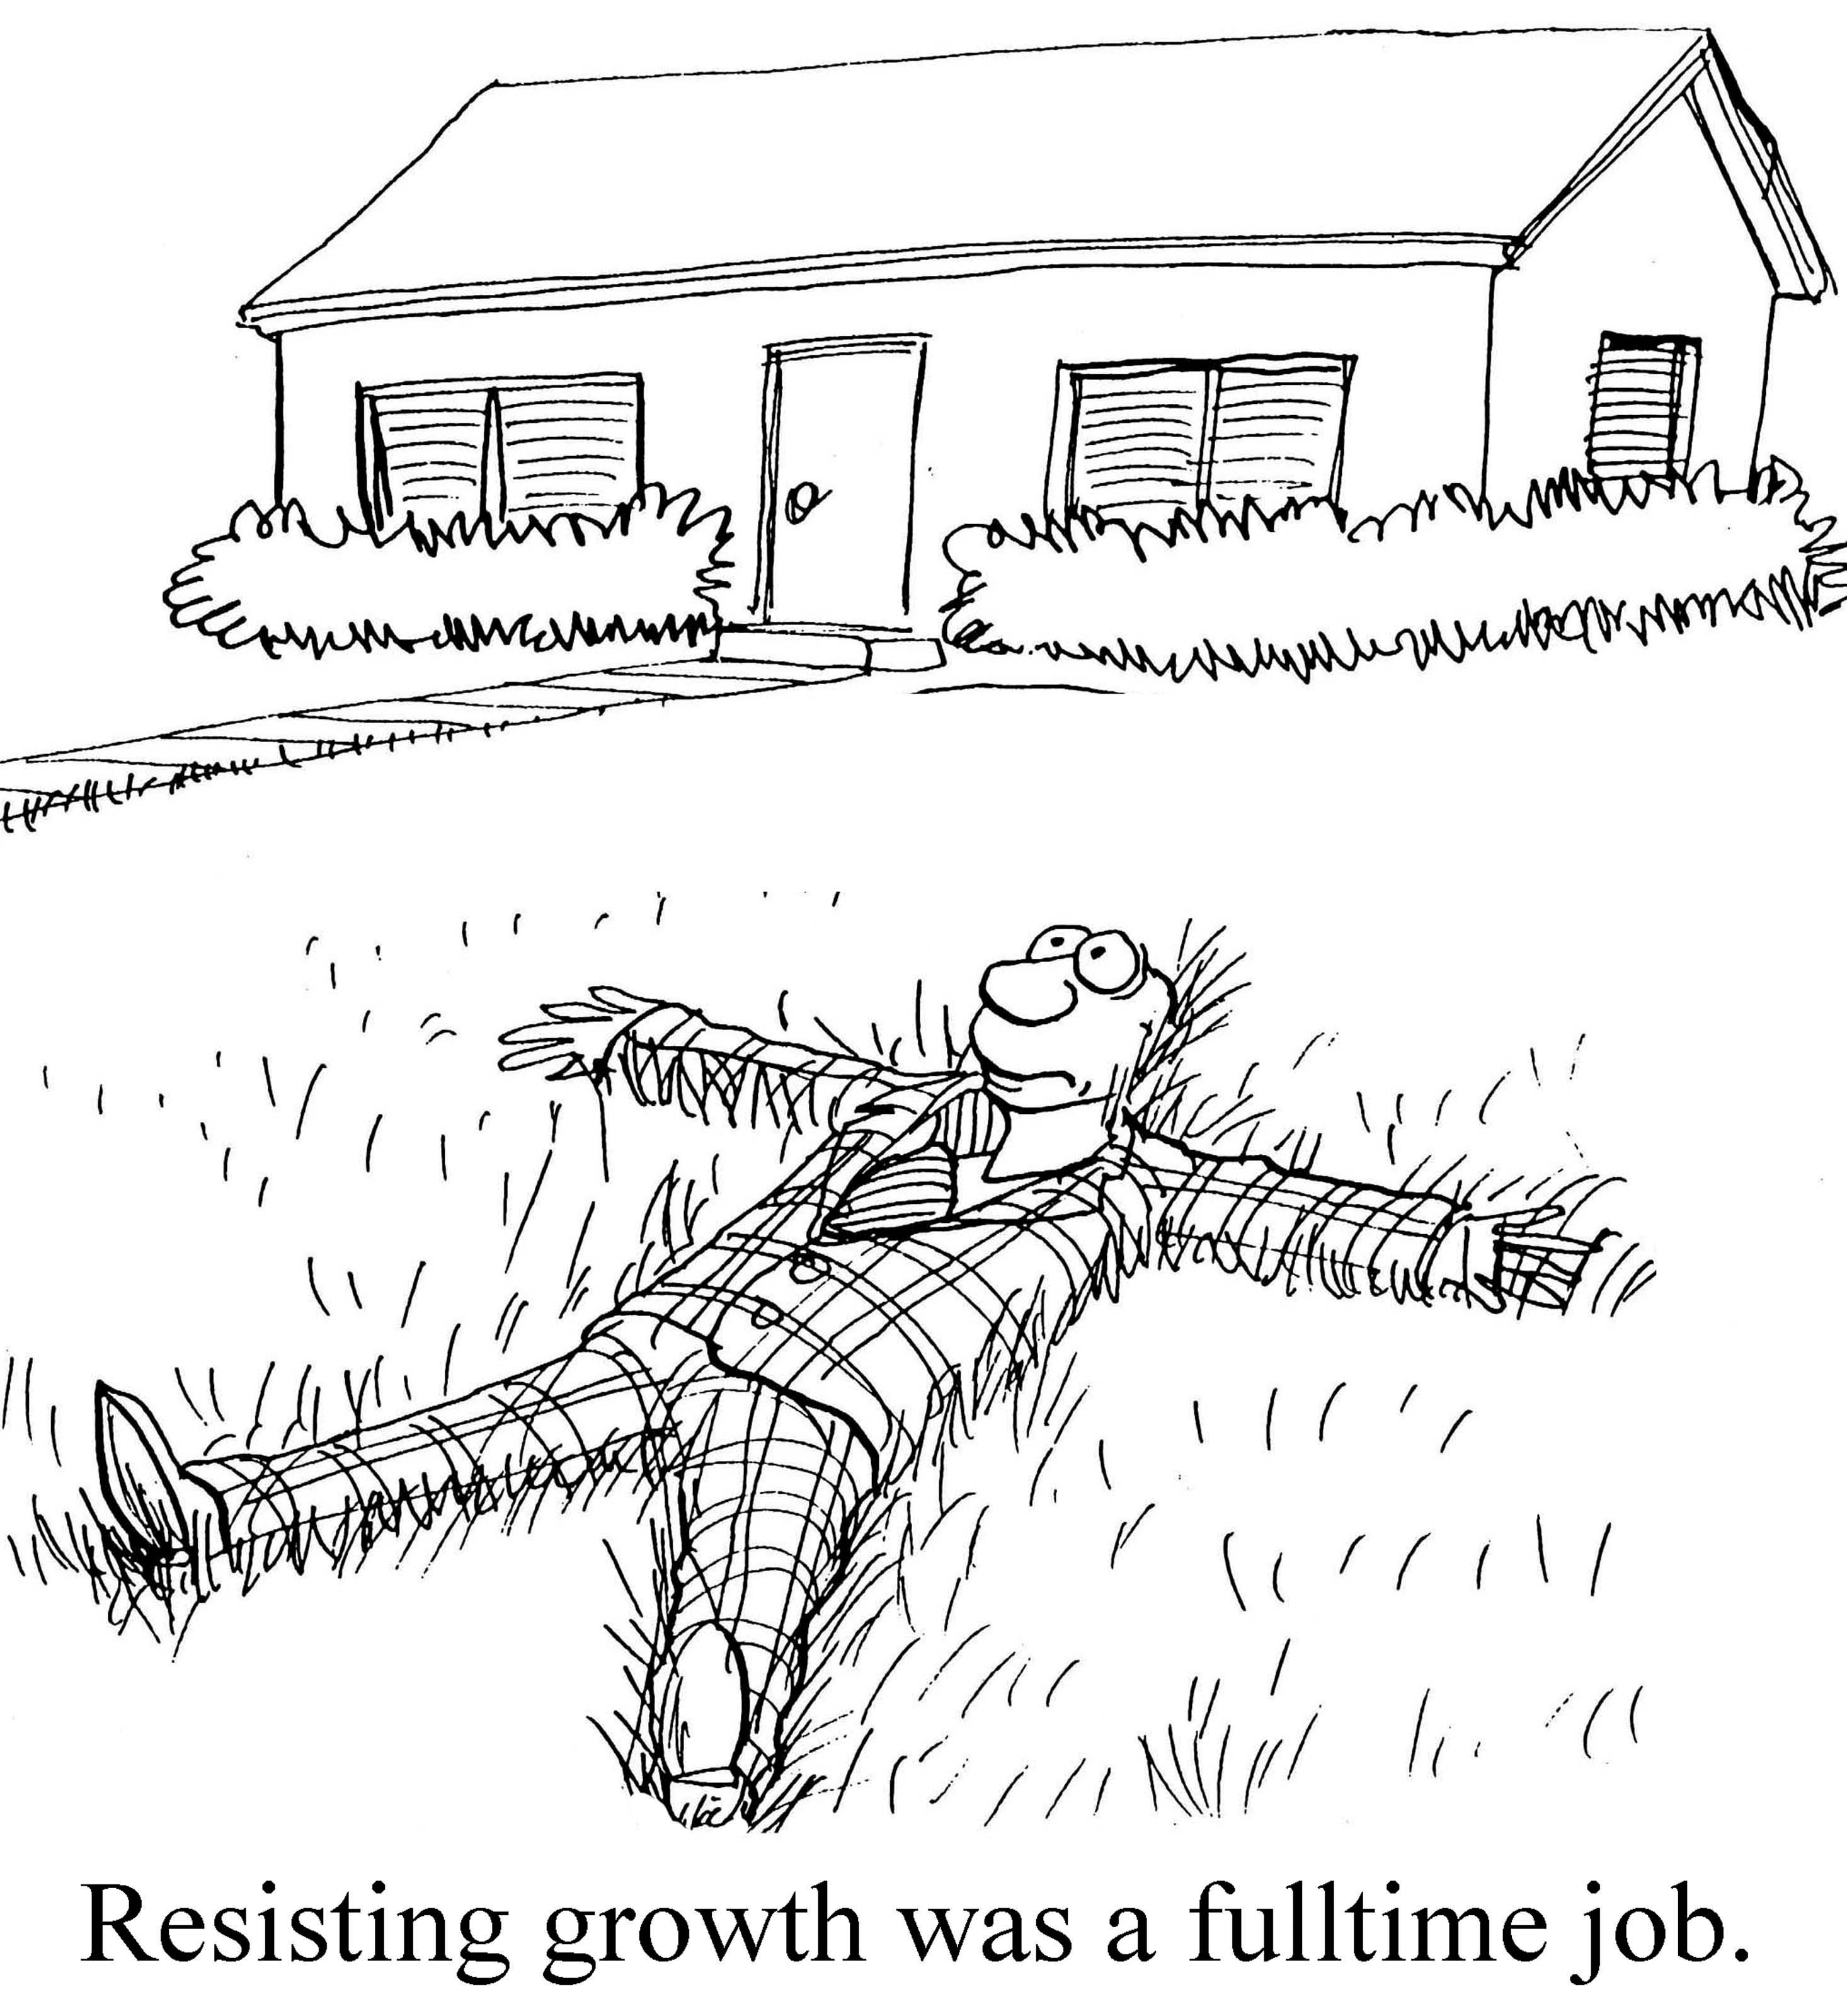 Cartoon of a personified house lying on a lawn like a human, with a caption about resisting growth being a fulltime job